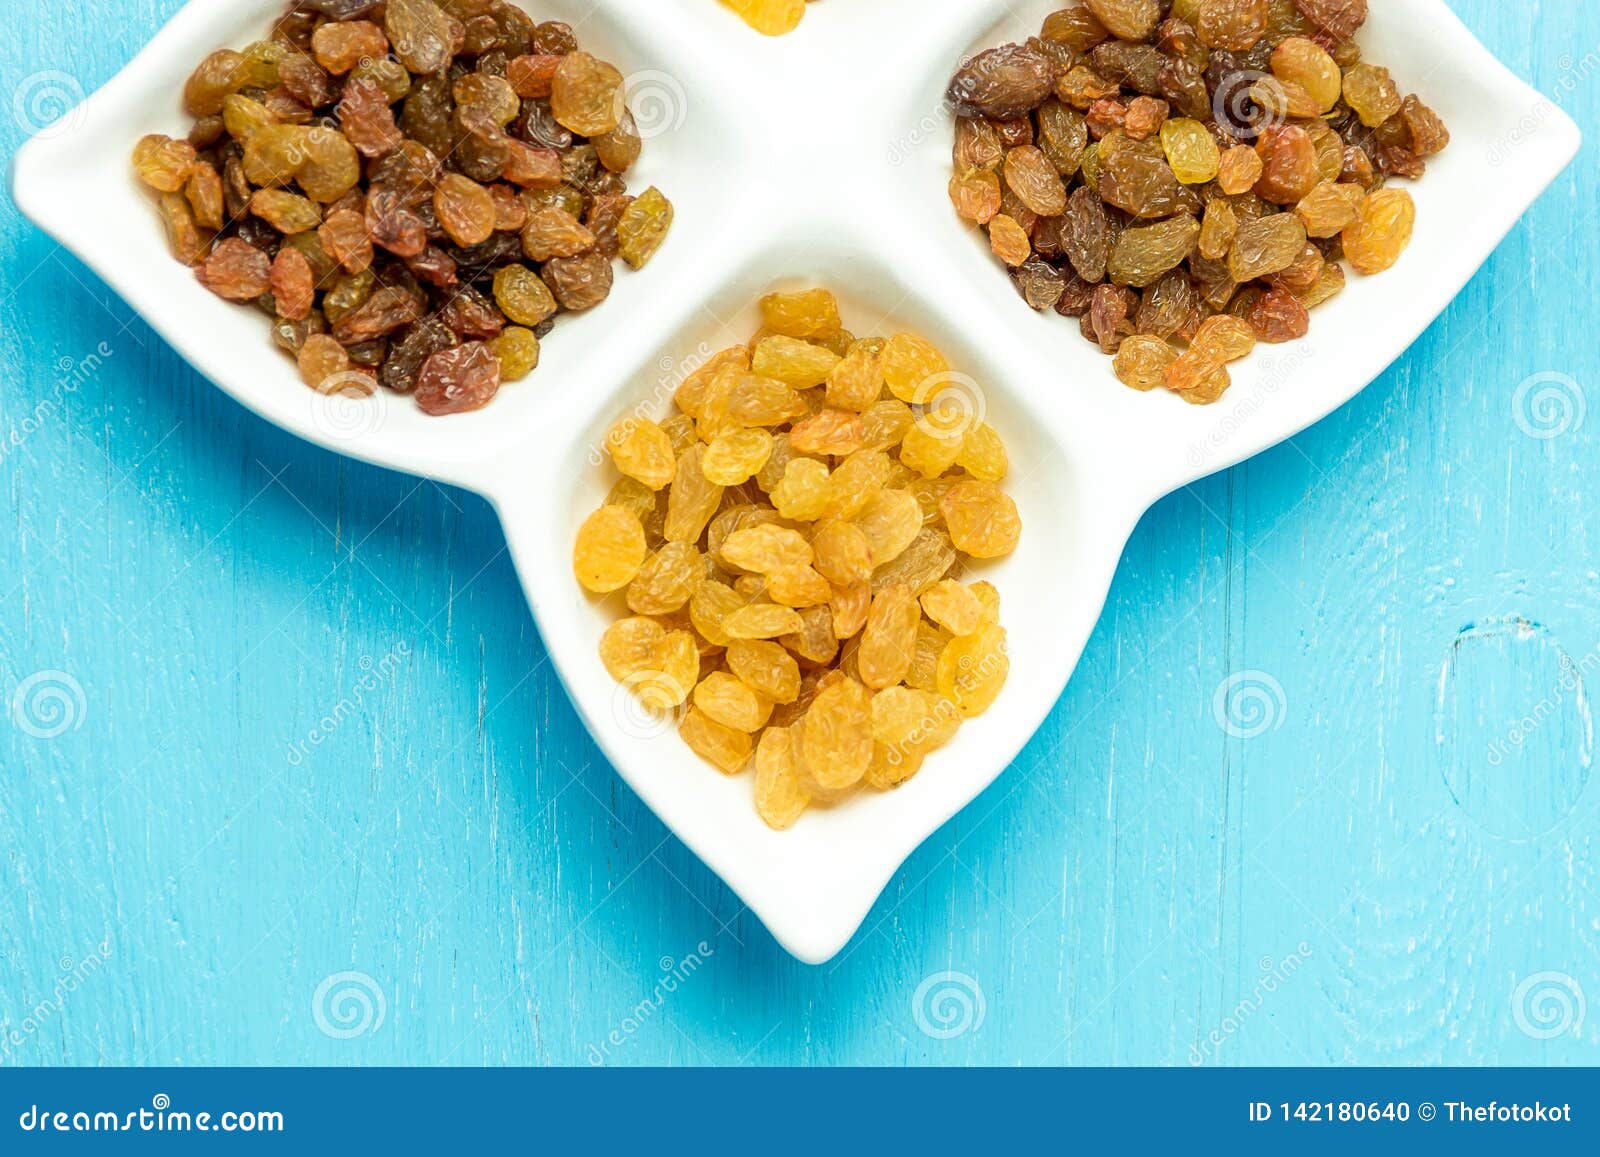 Golden and Brown Raisins on Plate. Top View of Dried Grapes. Stock ...